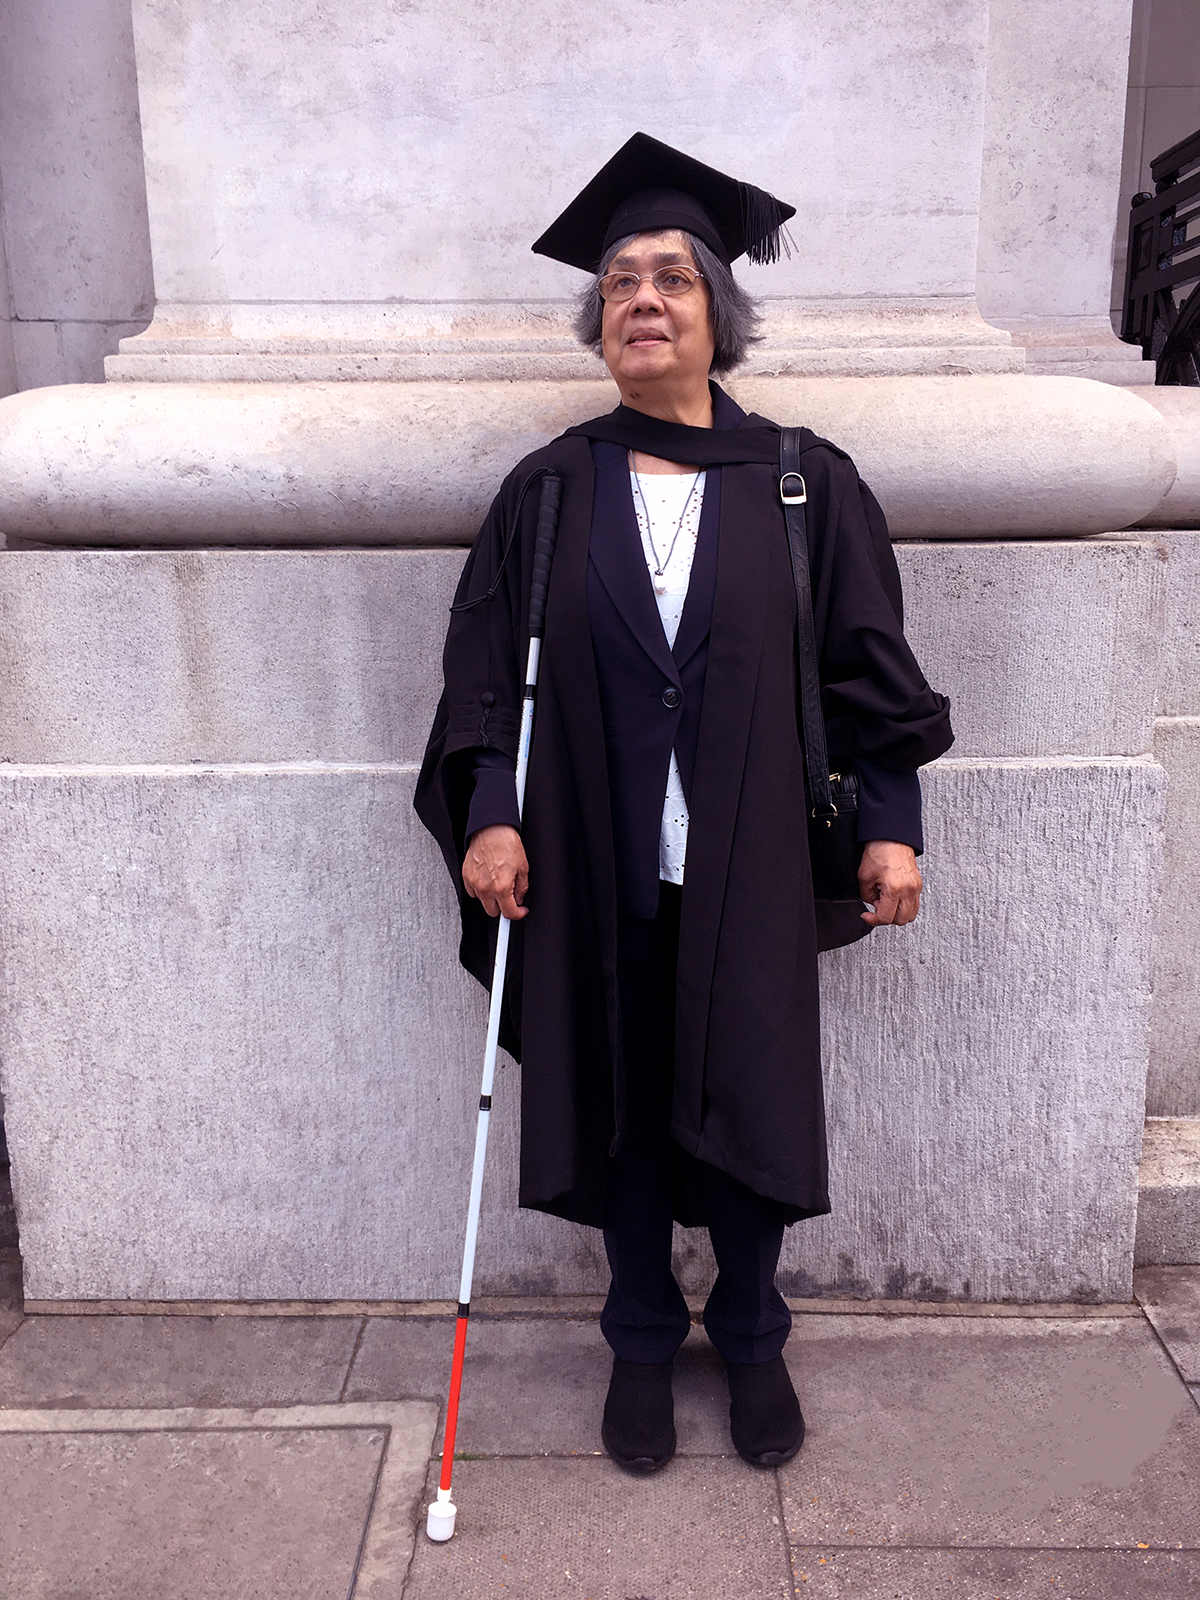 Donna Jodhan stands smiling in her cap and gown in front of the University of London England on July 14th 2022 where she was awarded her Law Degree.